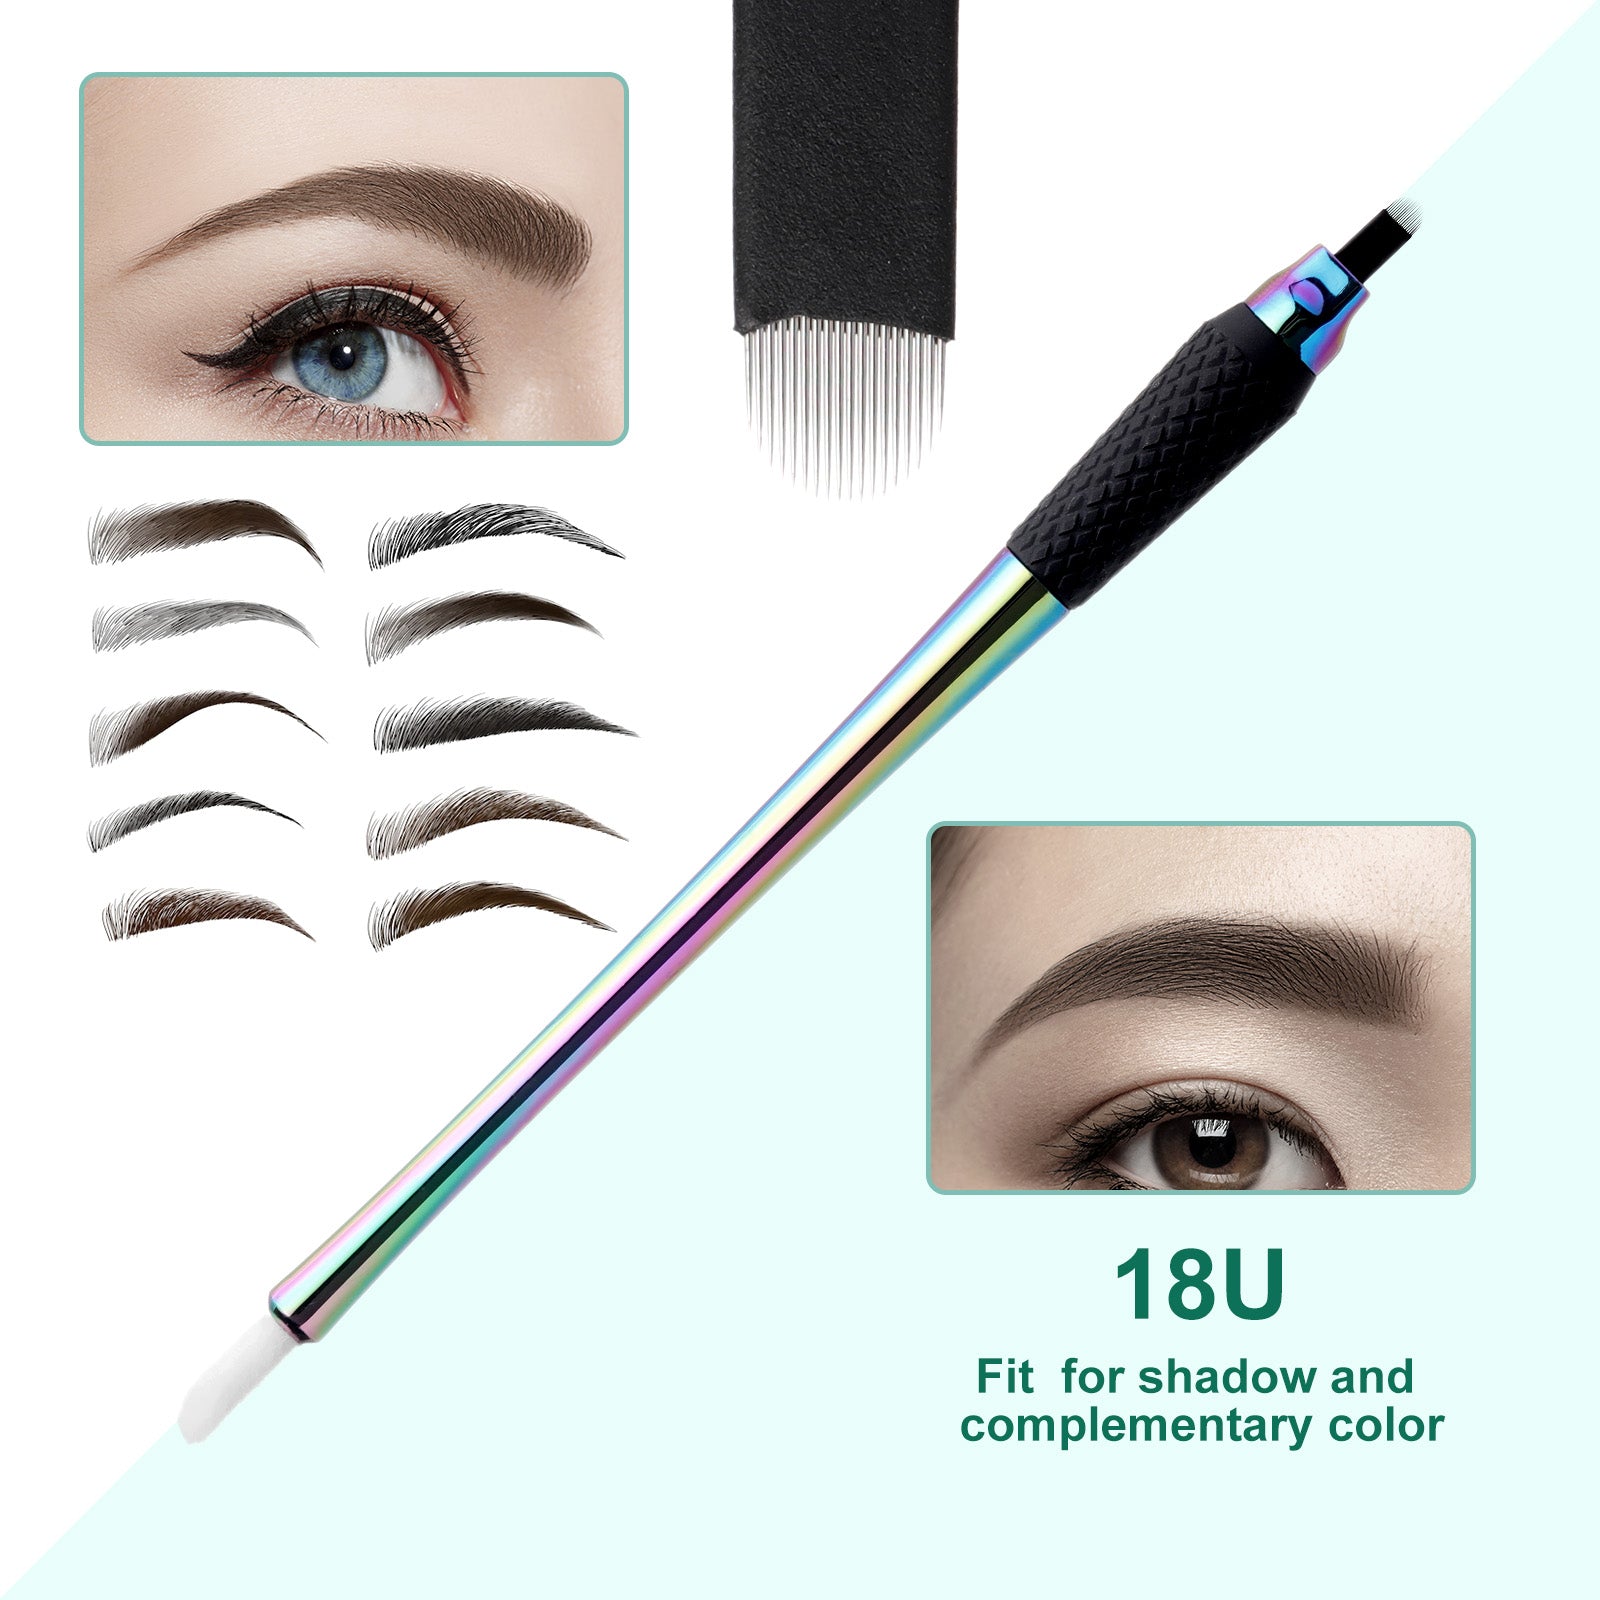 Charme Princesse Disposable Manual Eyebrow Pens for shadow and complementary color